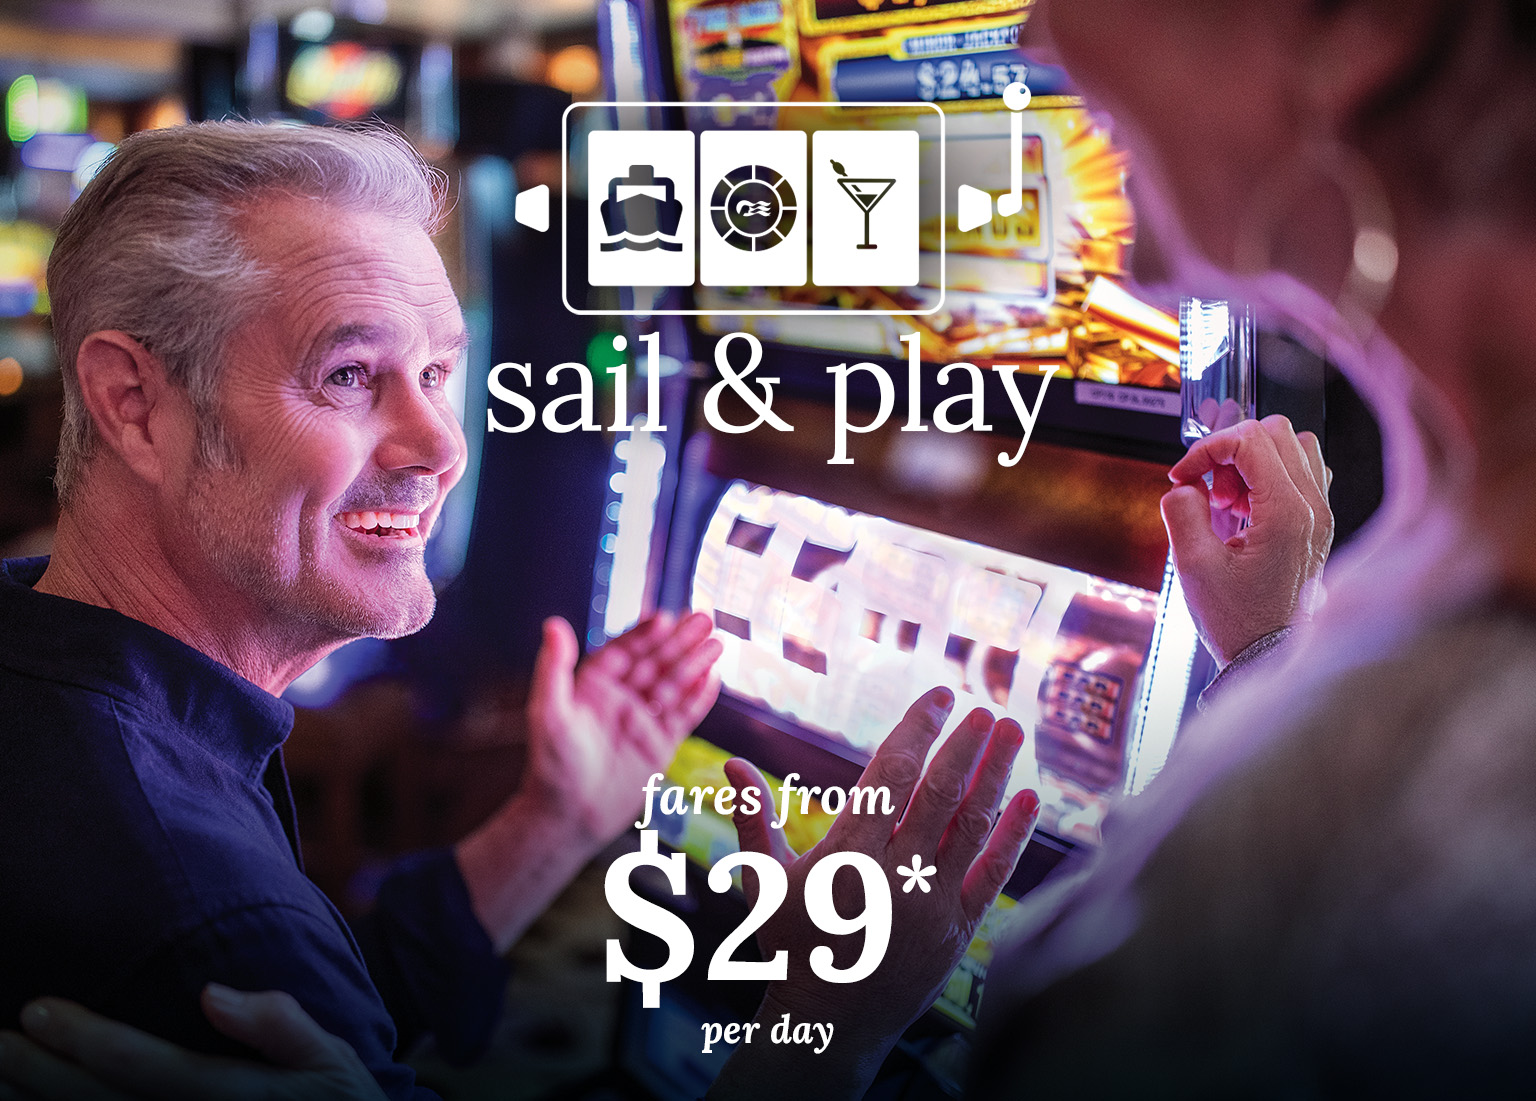 Three women laugh while playing at a craps table - free balcony stateroom1 + $500 casino free play2 + princess plus included^